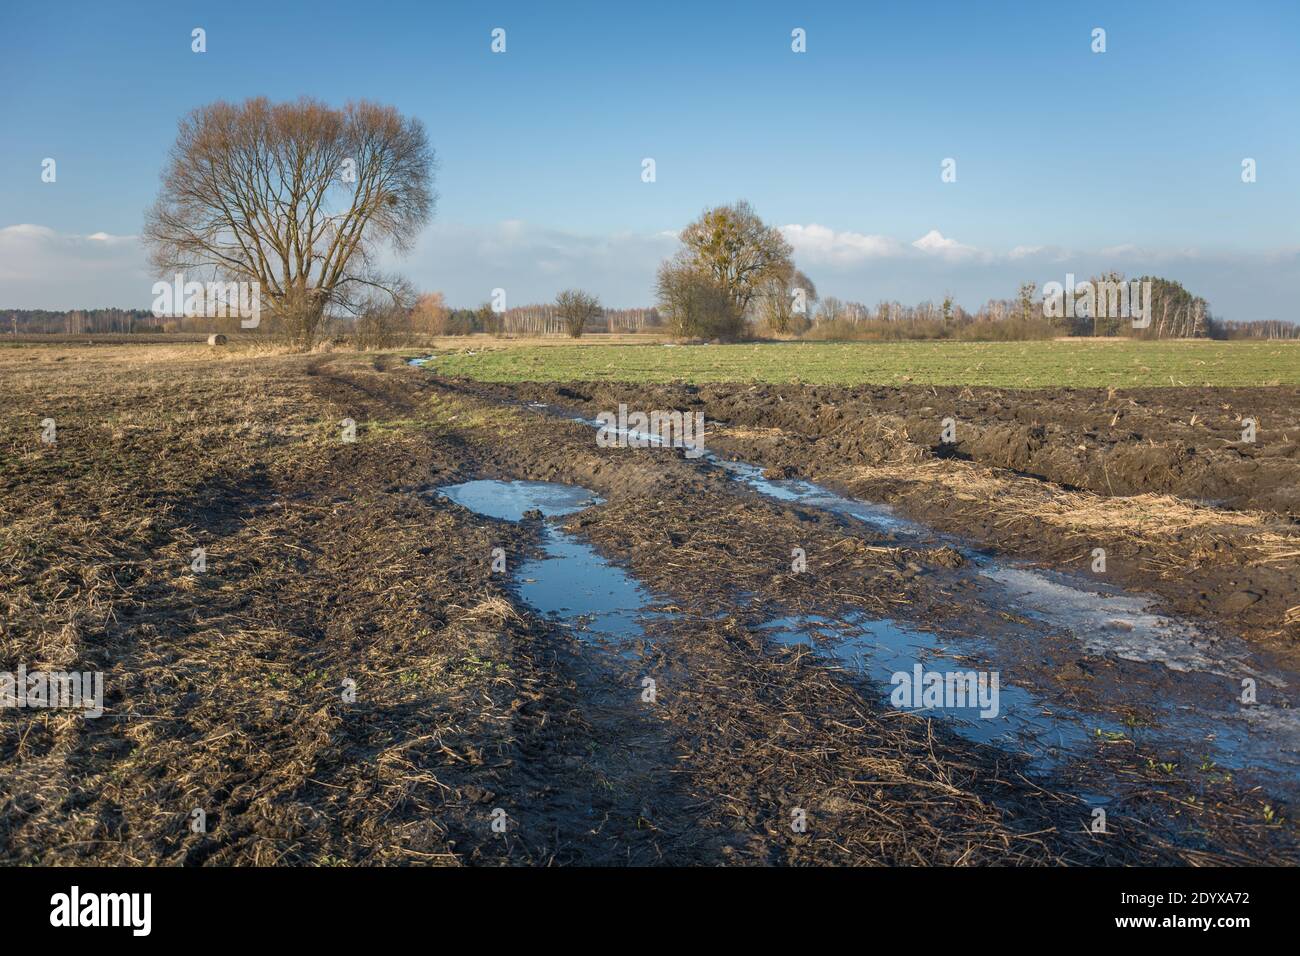 Premium Photo  A muddy field with mud and grass that has been muddy and  has a large puddle of water in it.